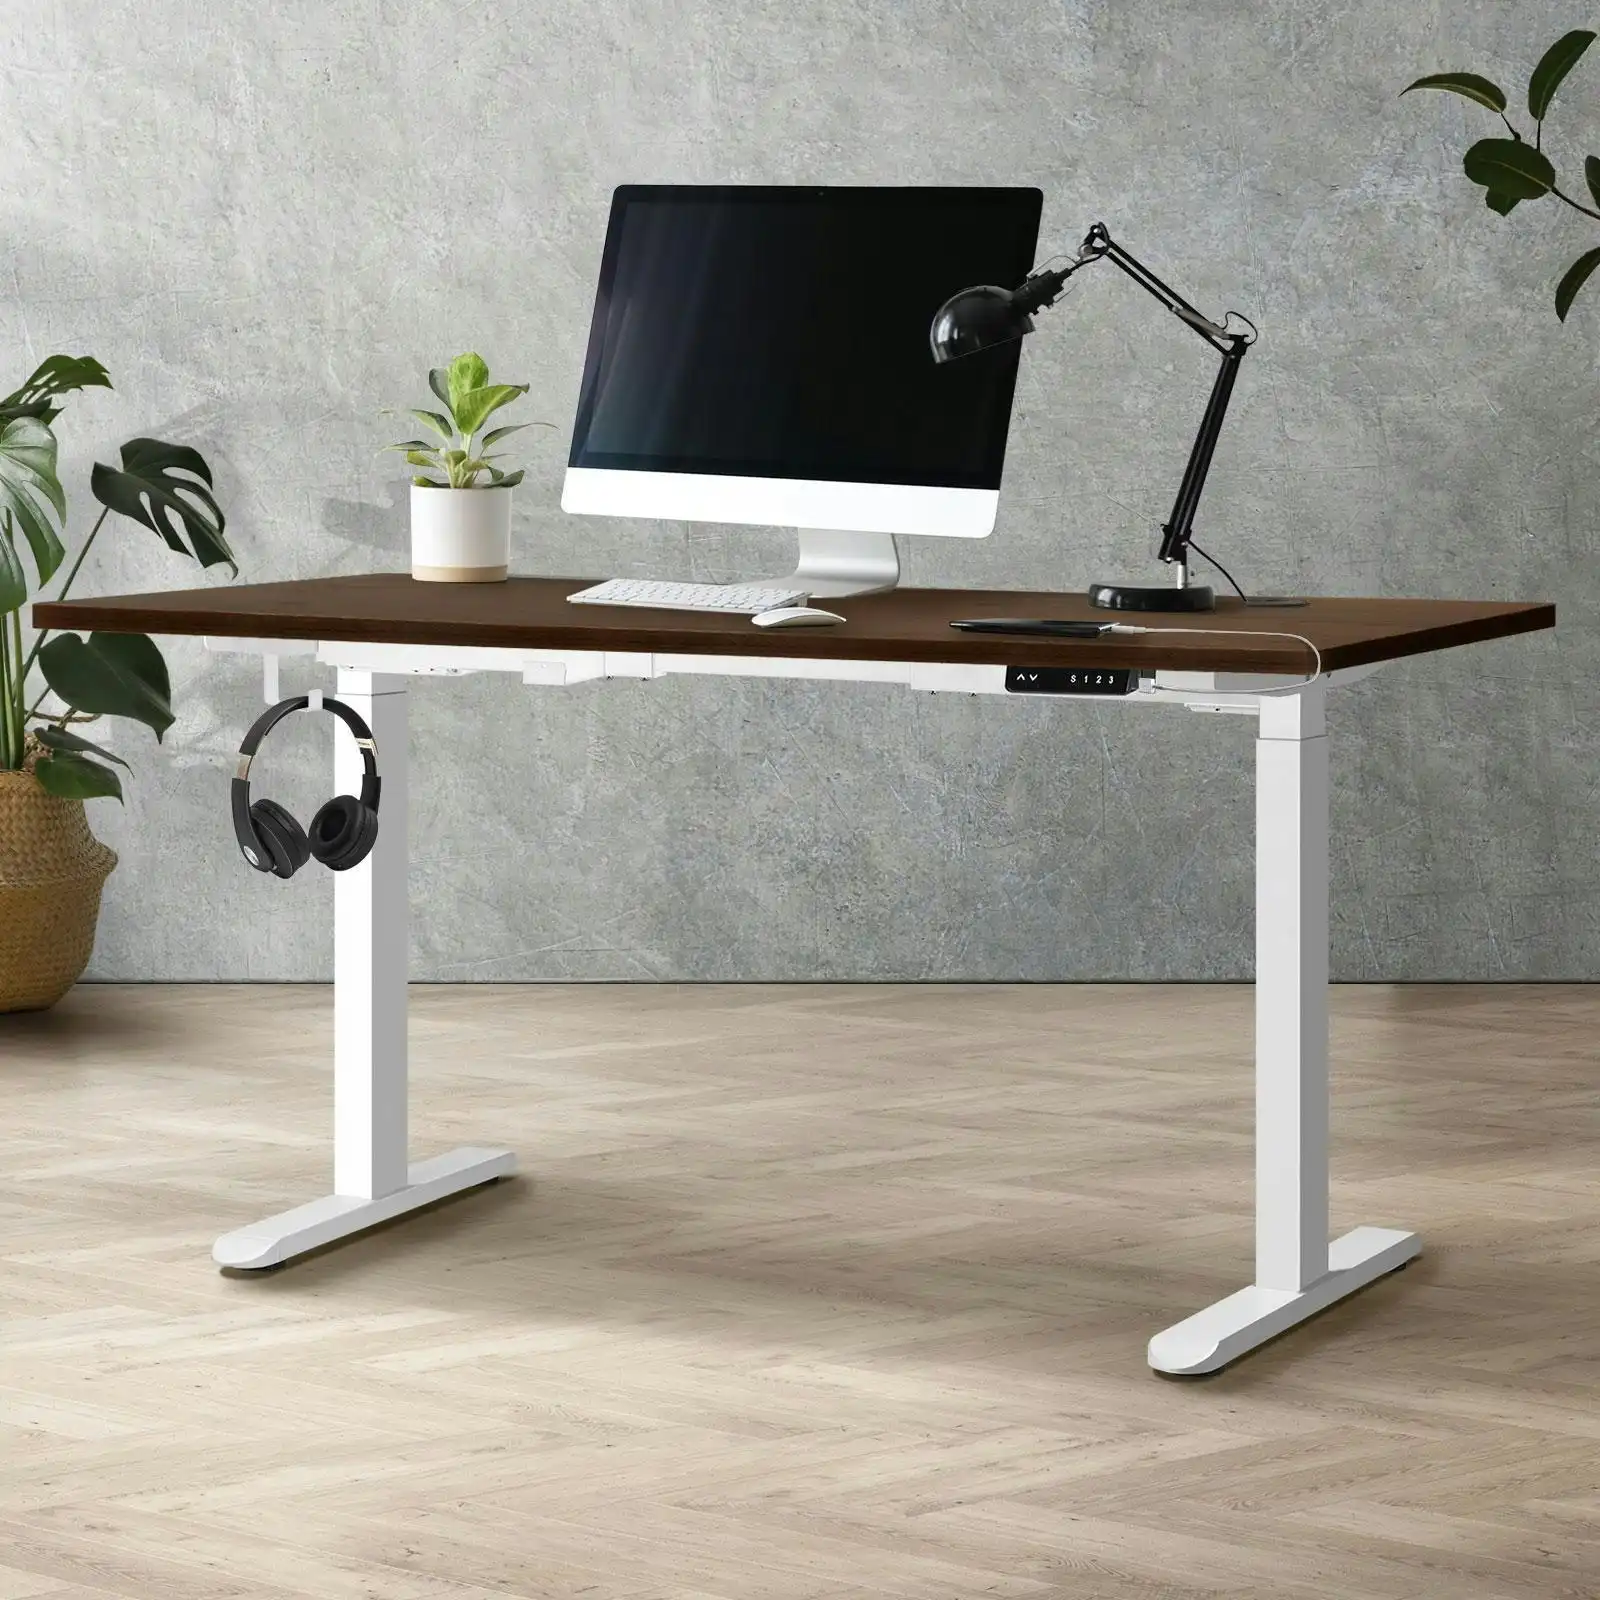 Oikiture 150cm Electric Standing Desk Dual Motor White Frame Walnut Desktop With USB&Type C Port